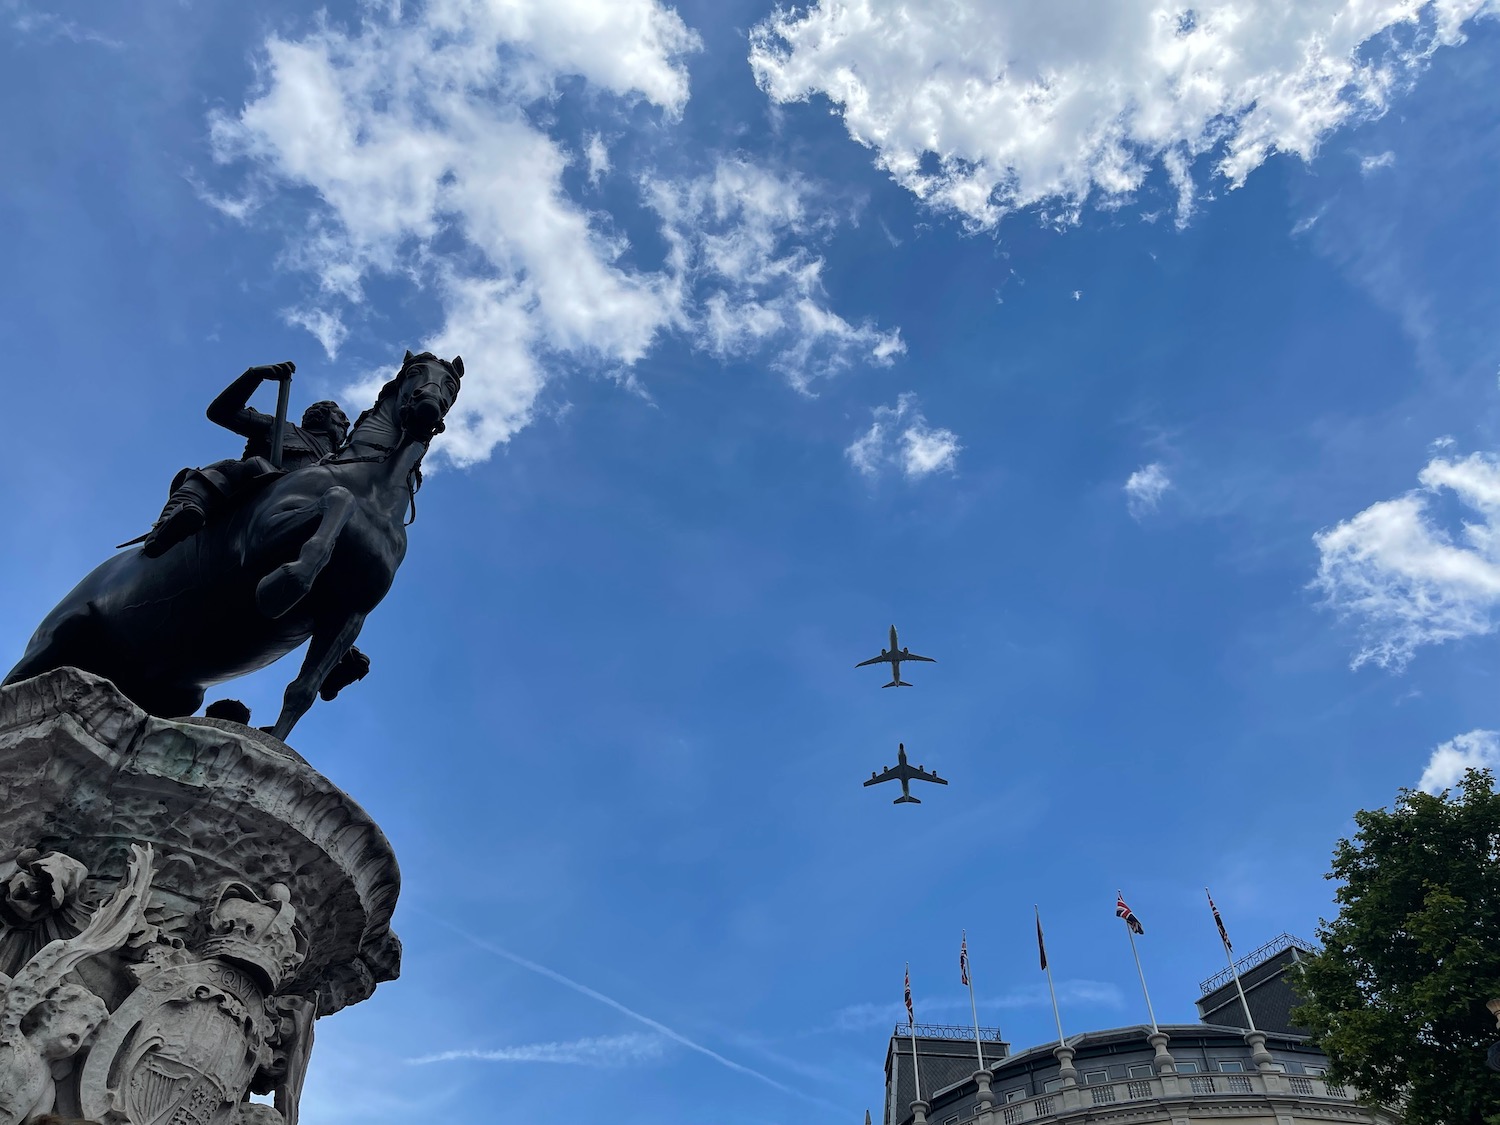 a statue of a man on a horse and two planes flying in the sky